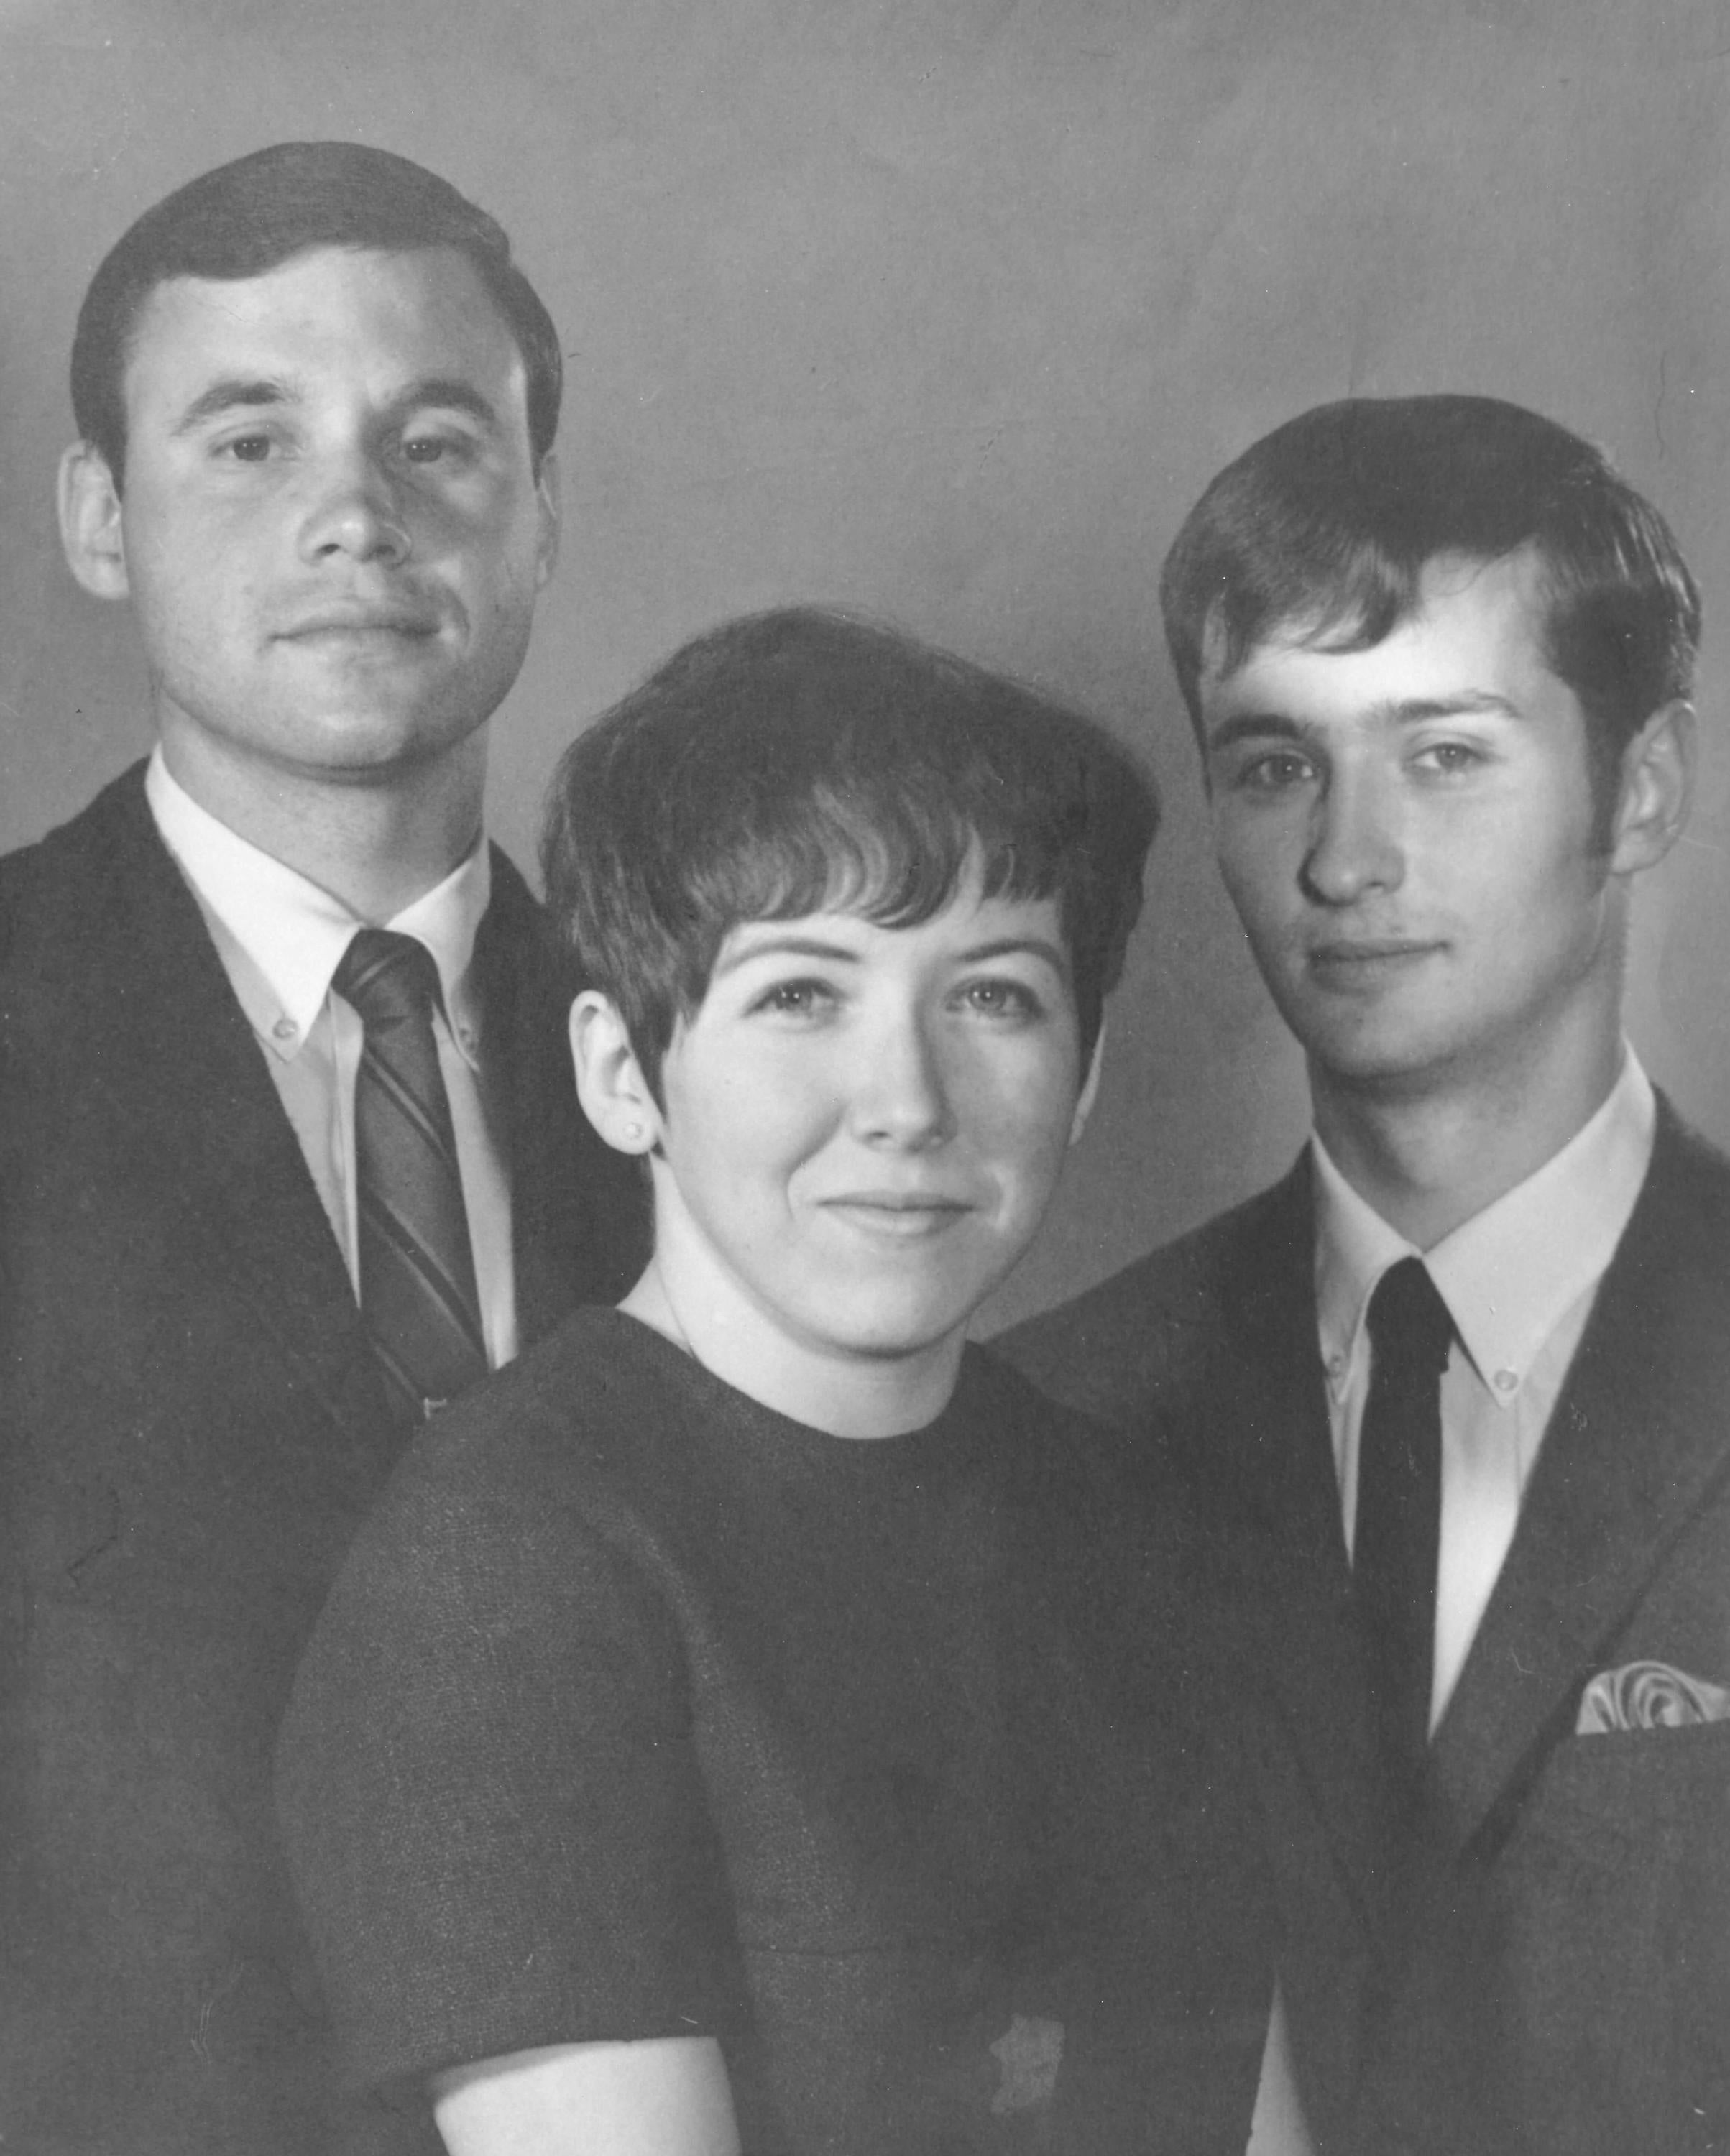 Black and white image of two young men and one women from 1968. 